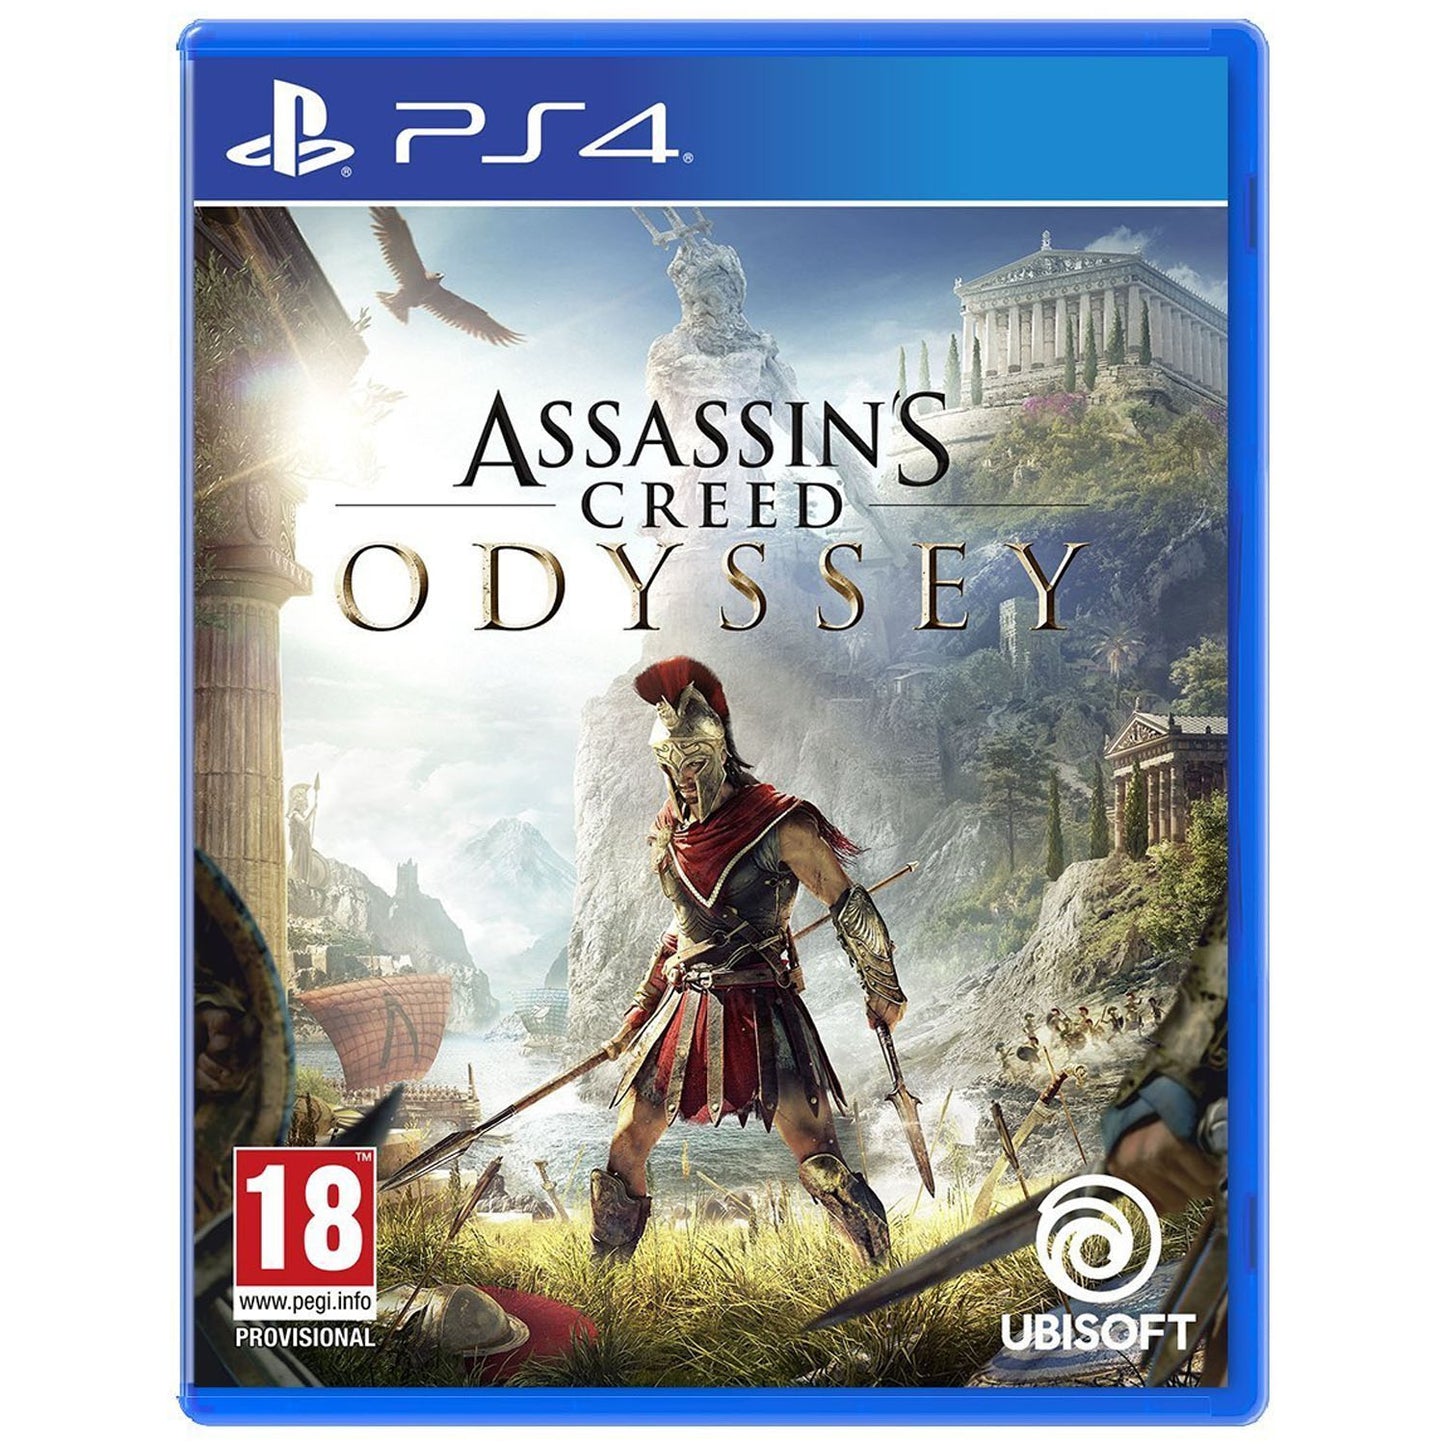 Assassin's Creed Odyssey For PS4